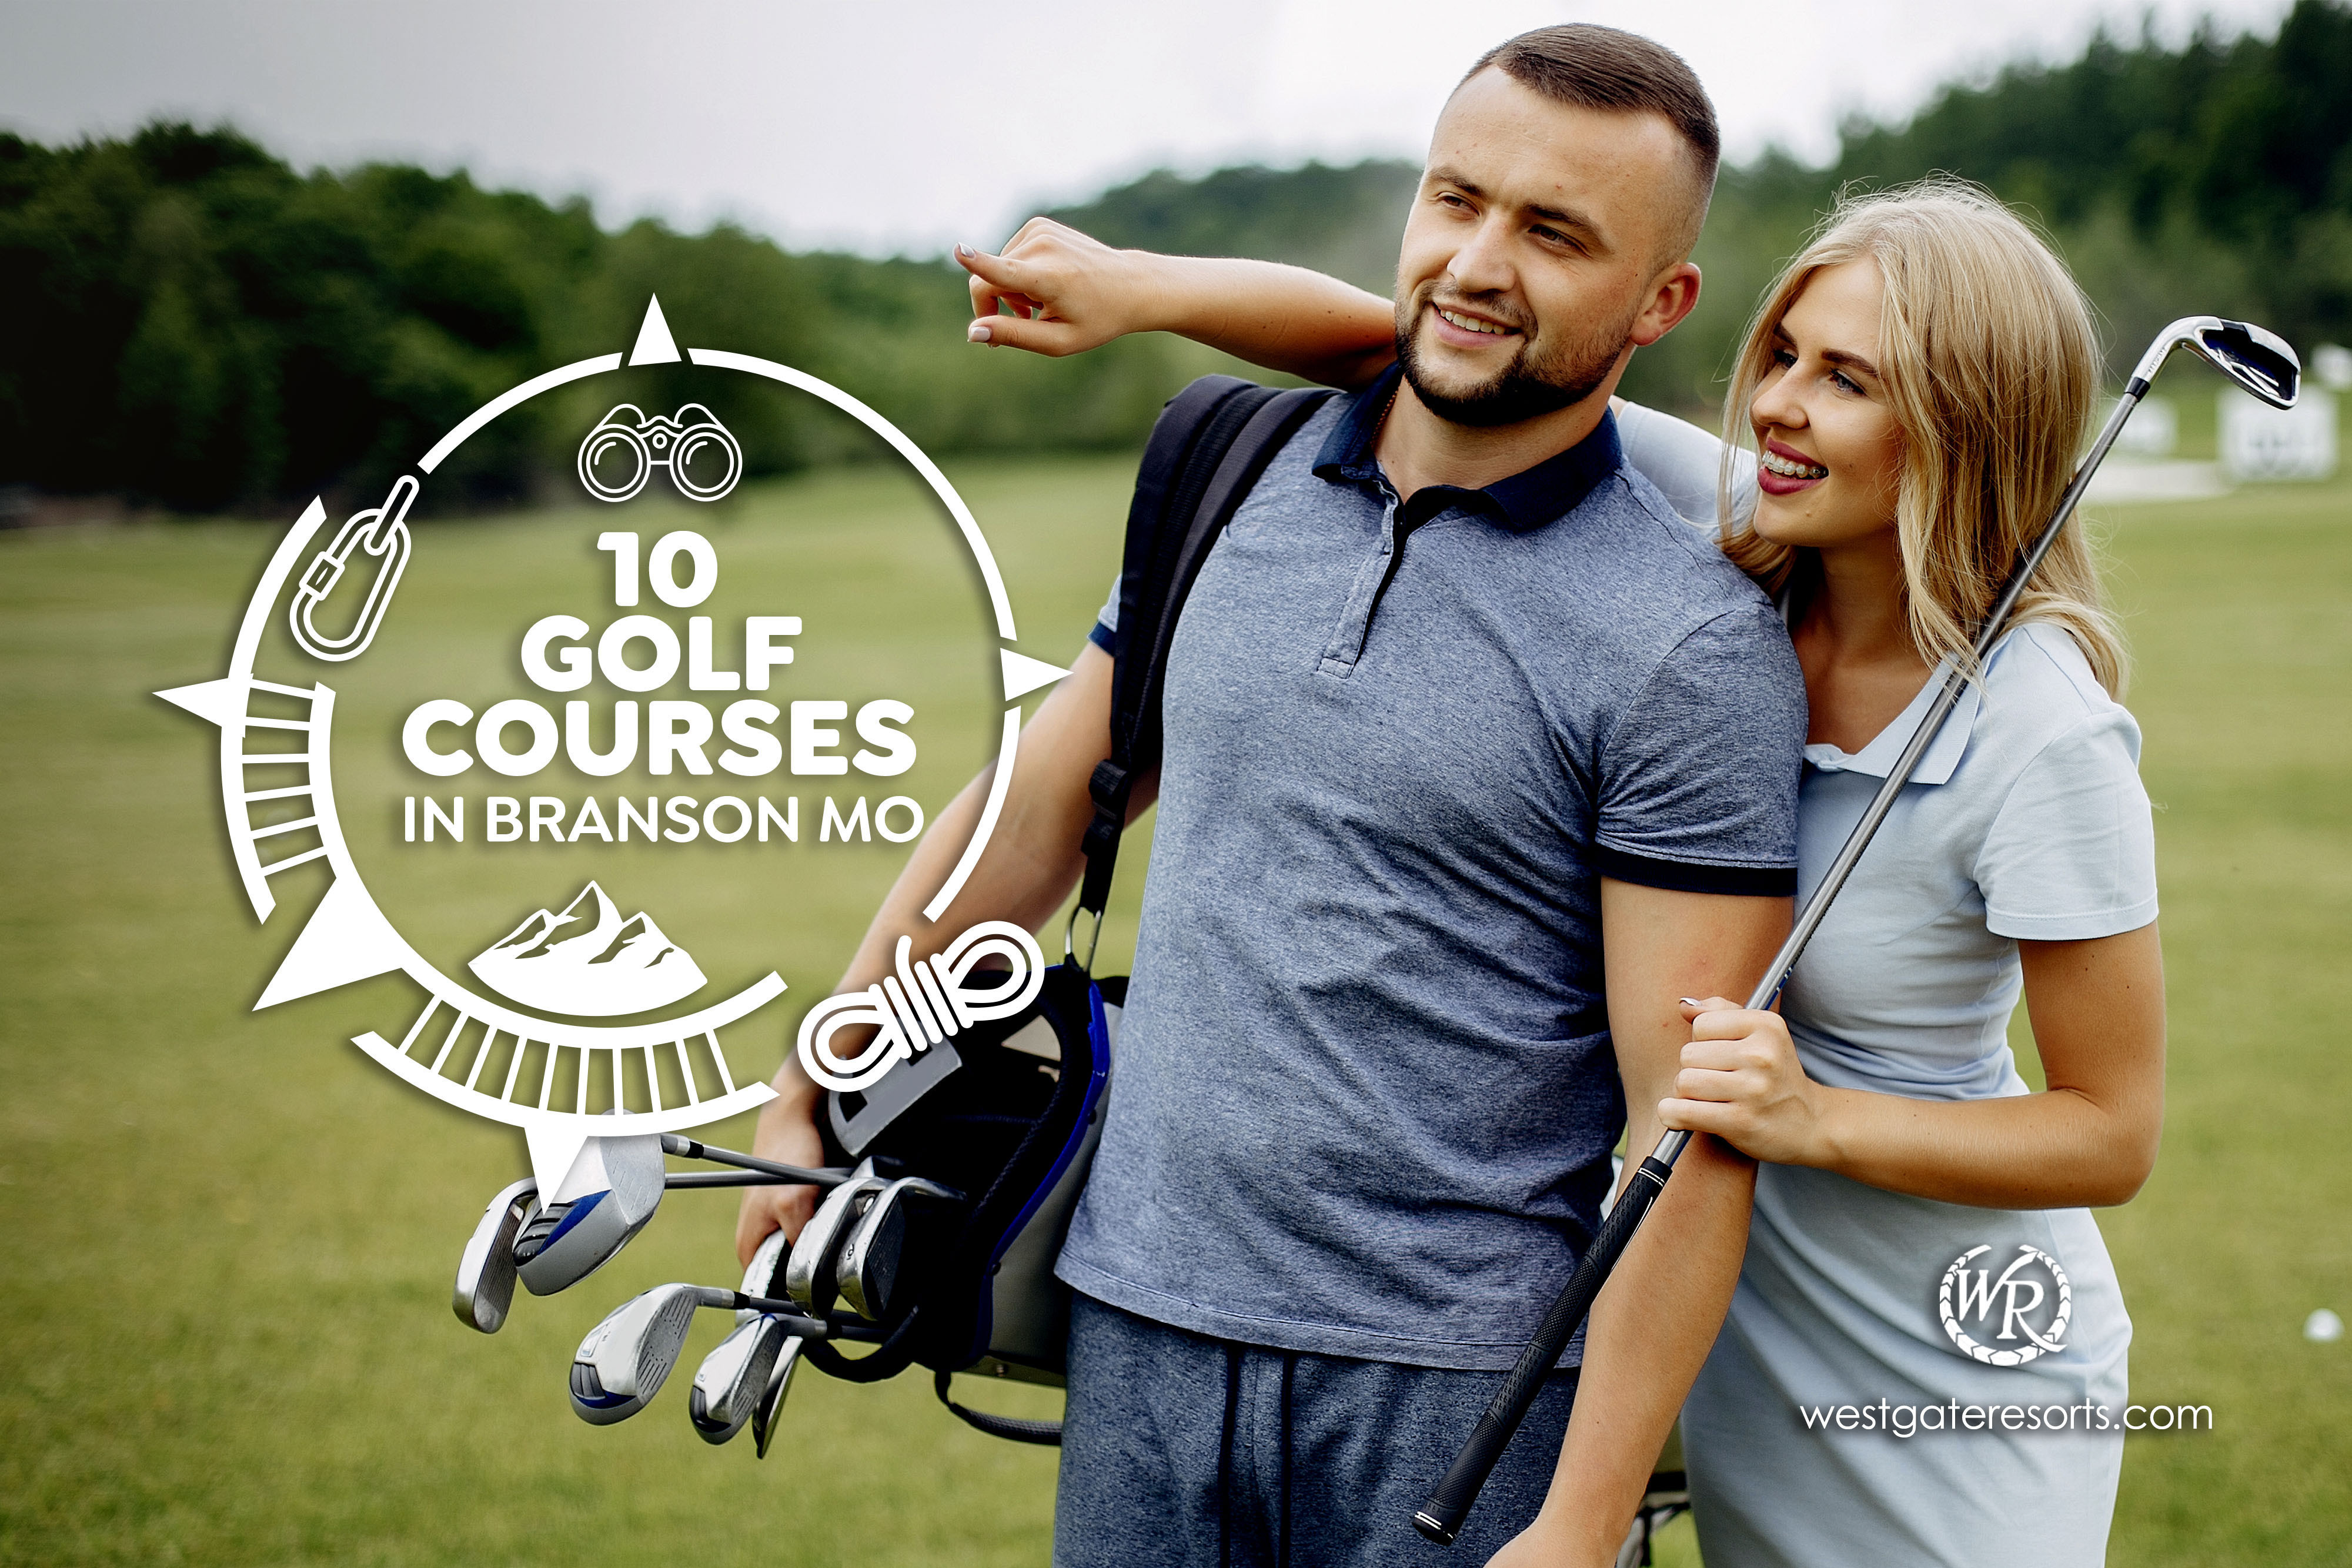 10 Golf Courses in Branson MO to Test Your Swing At